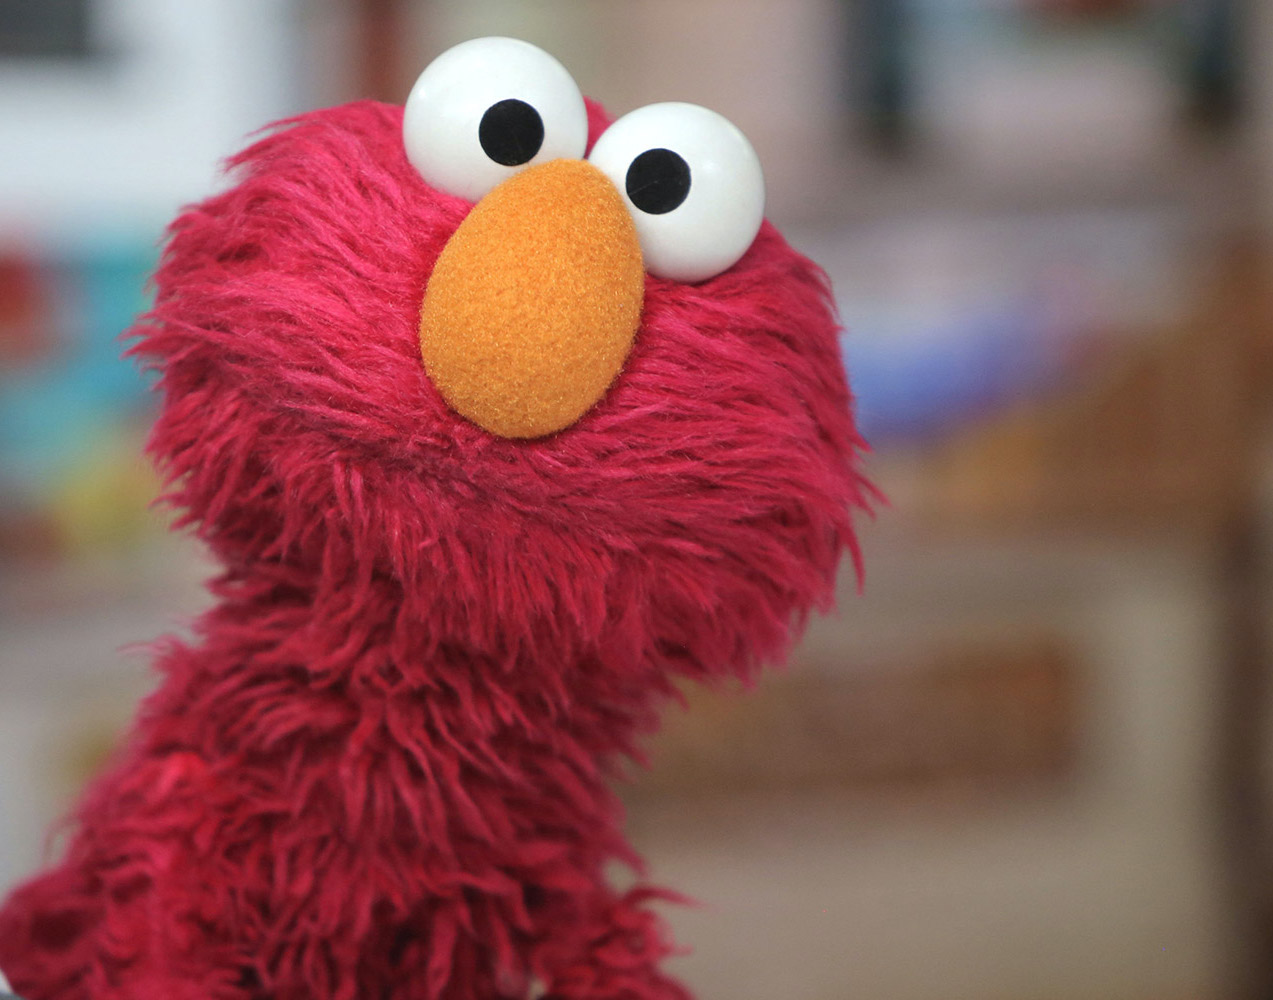 EL_S_TH H__ST_ON appears as the Sesame Street character Elmo